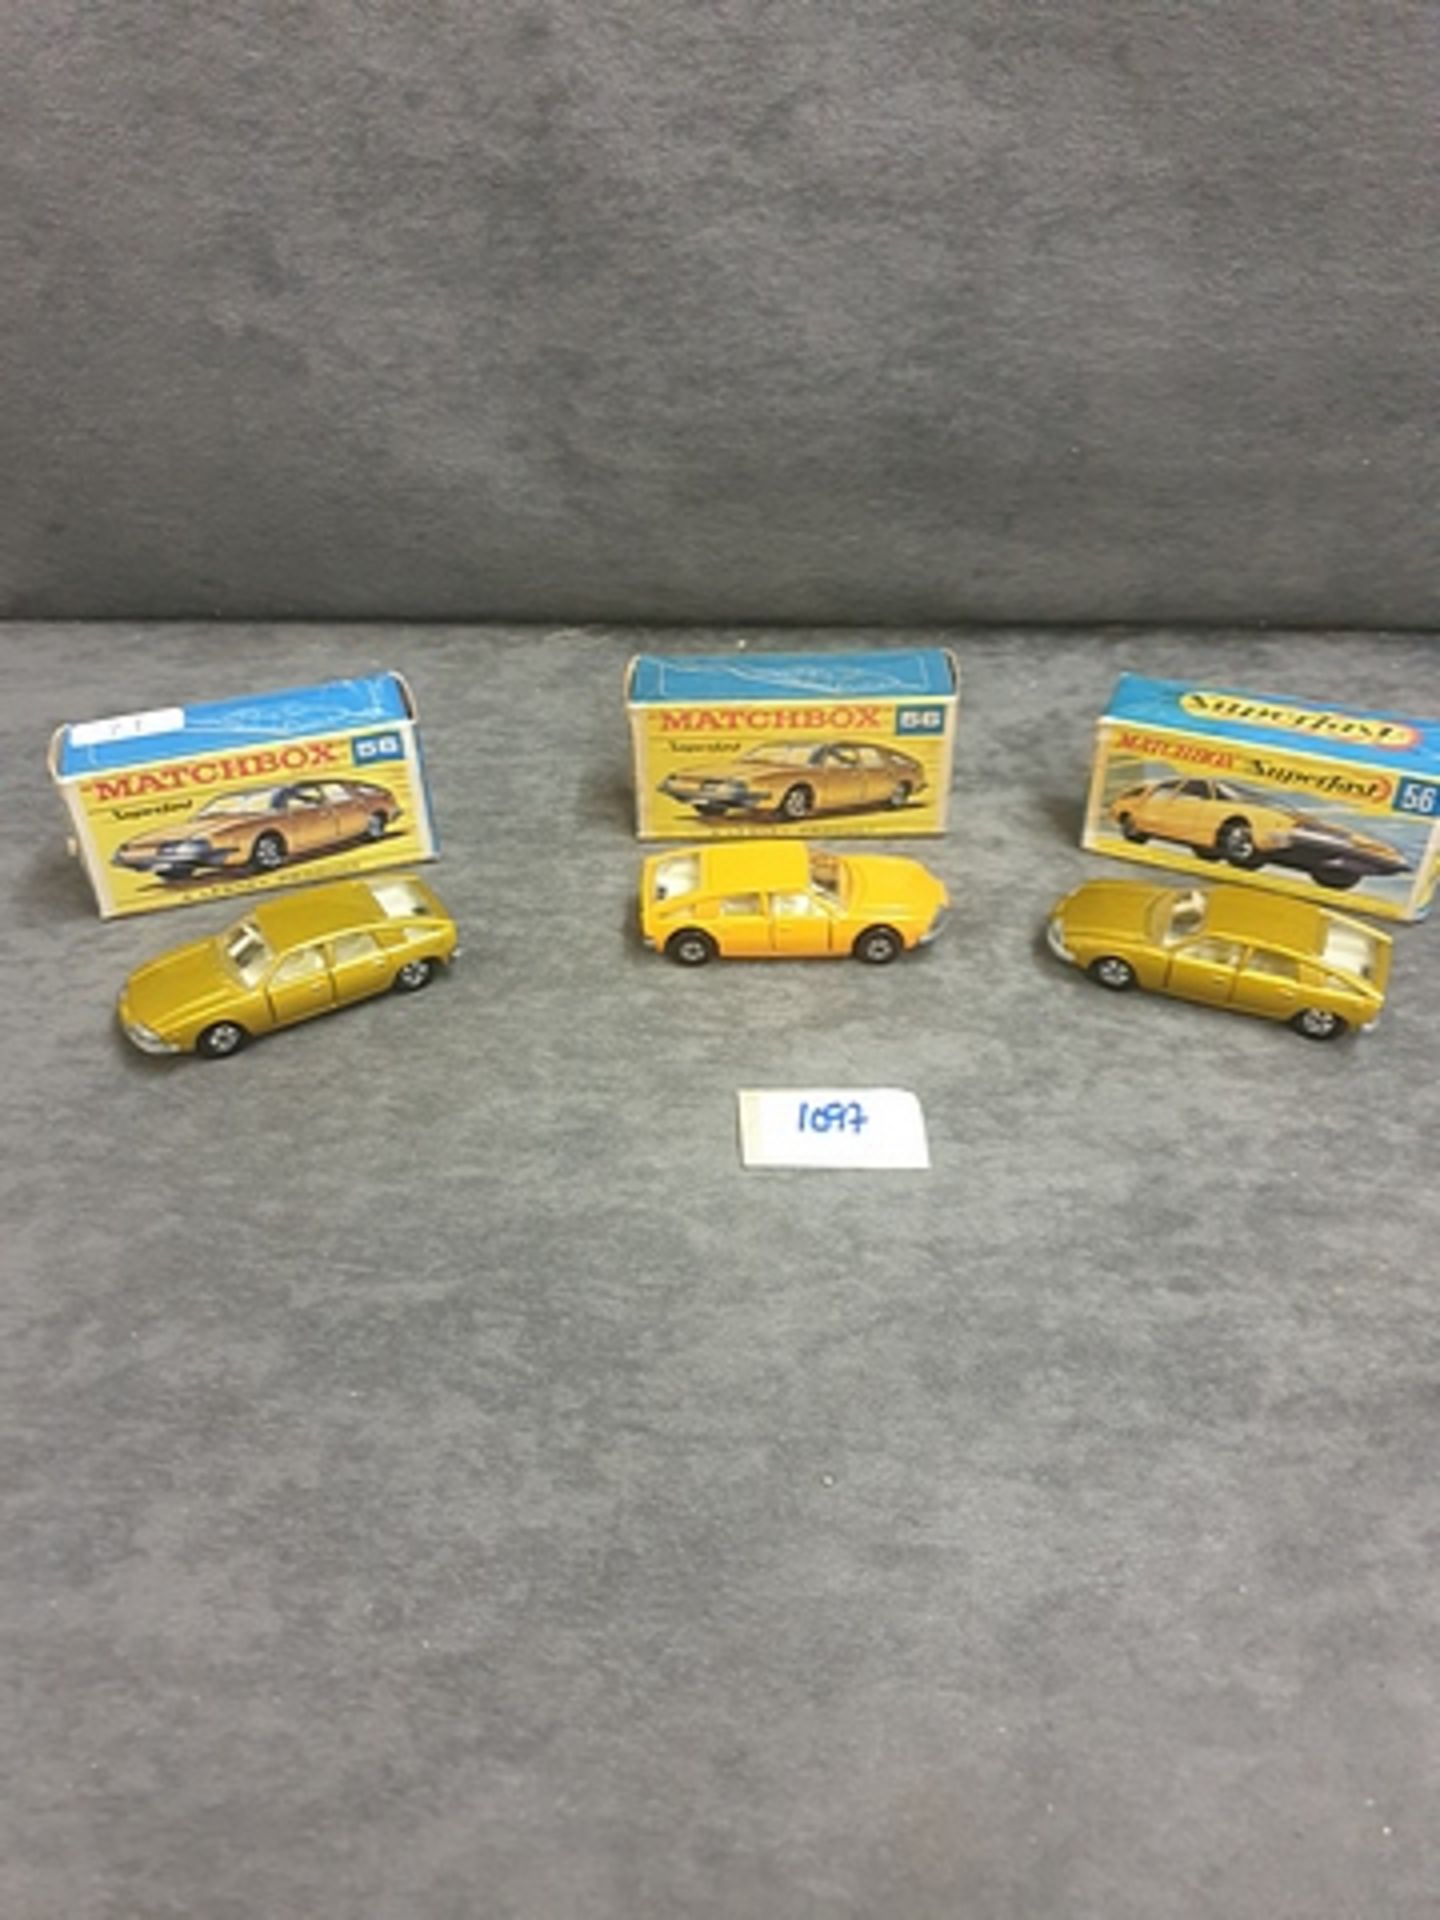 3x Matchbox Superfast Diecast Cars #56 2x Gold In Boxes One With End Flap Missing 1x Orange In